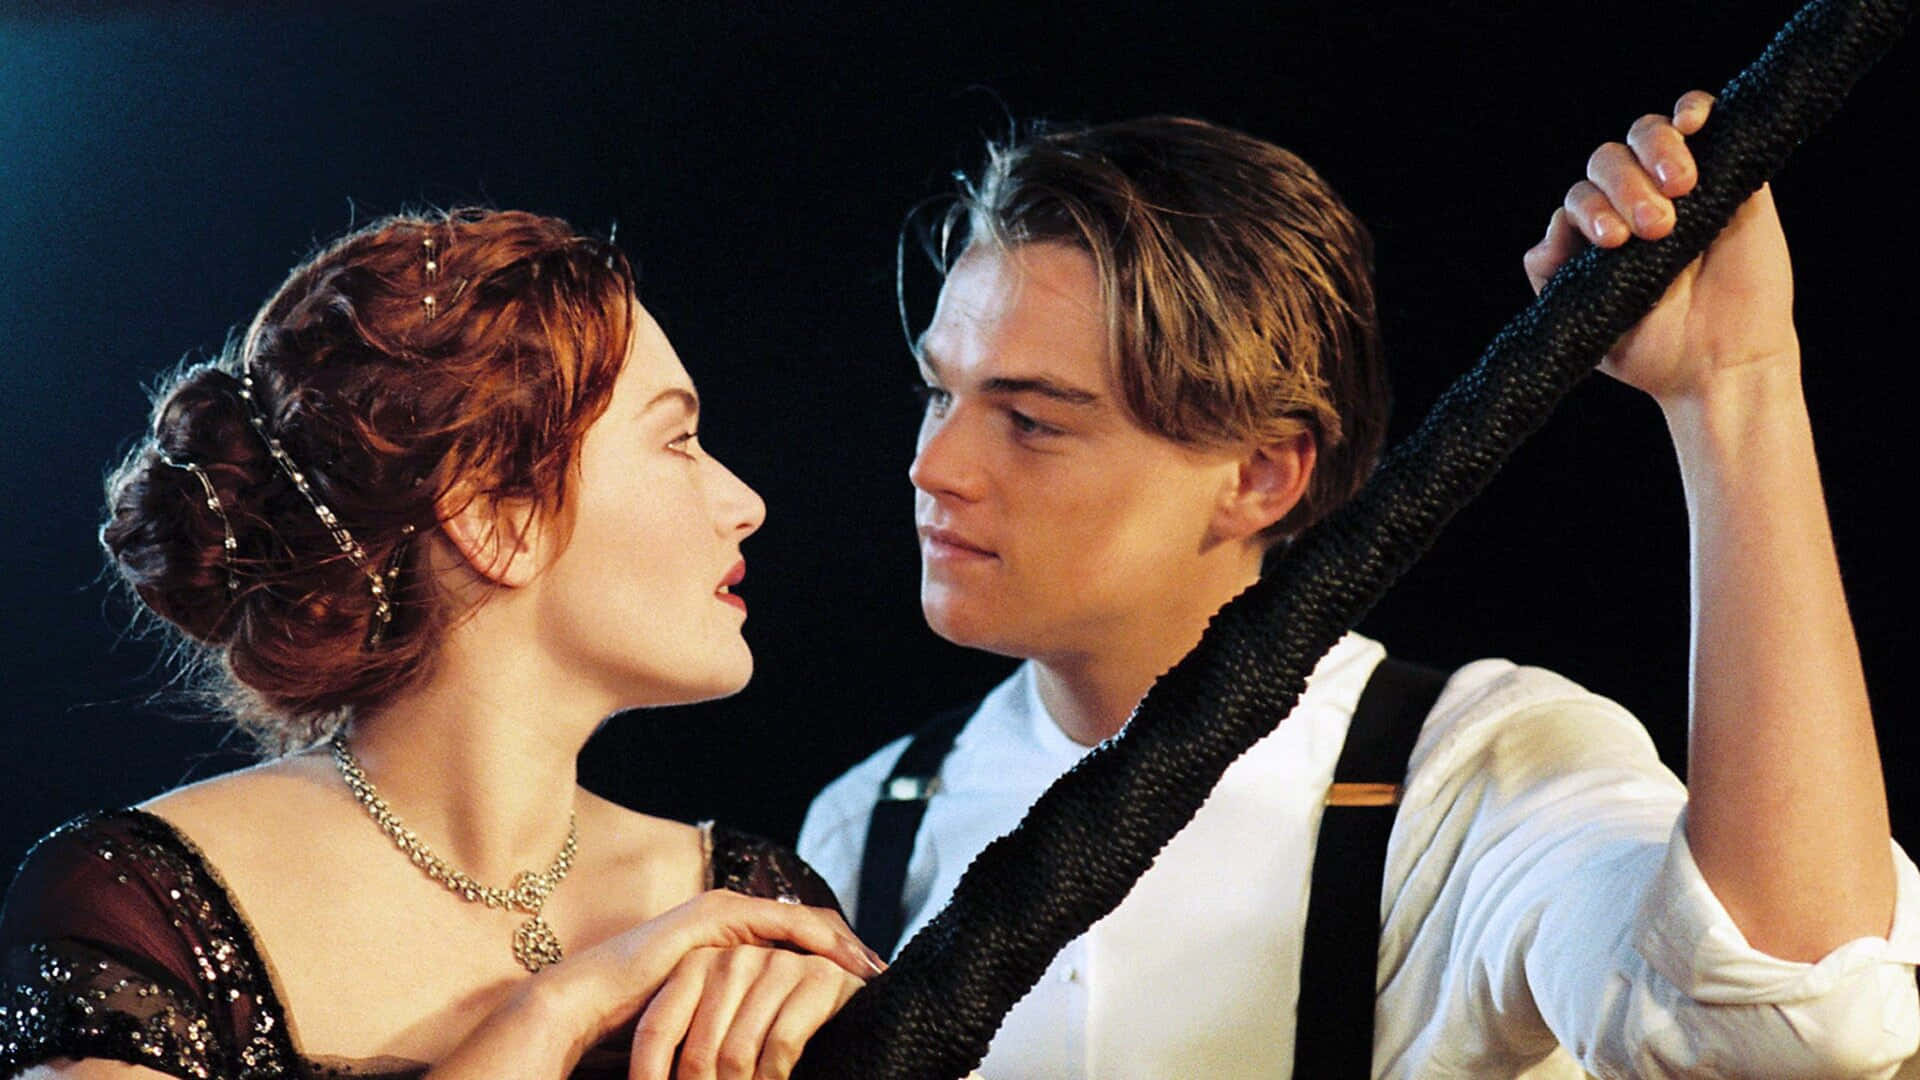 If you guys remember that titanic pose, will Kate Winslet die if she  accidentally falls off the ship in the movie? - Quora